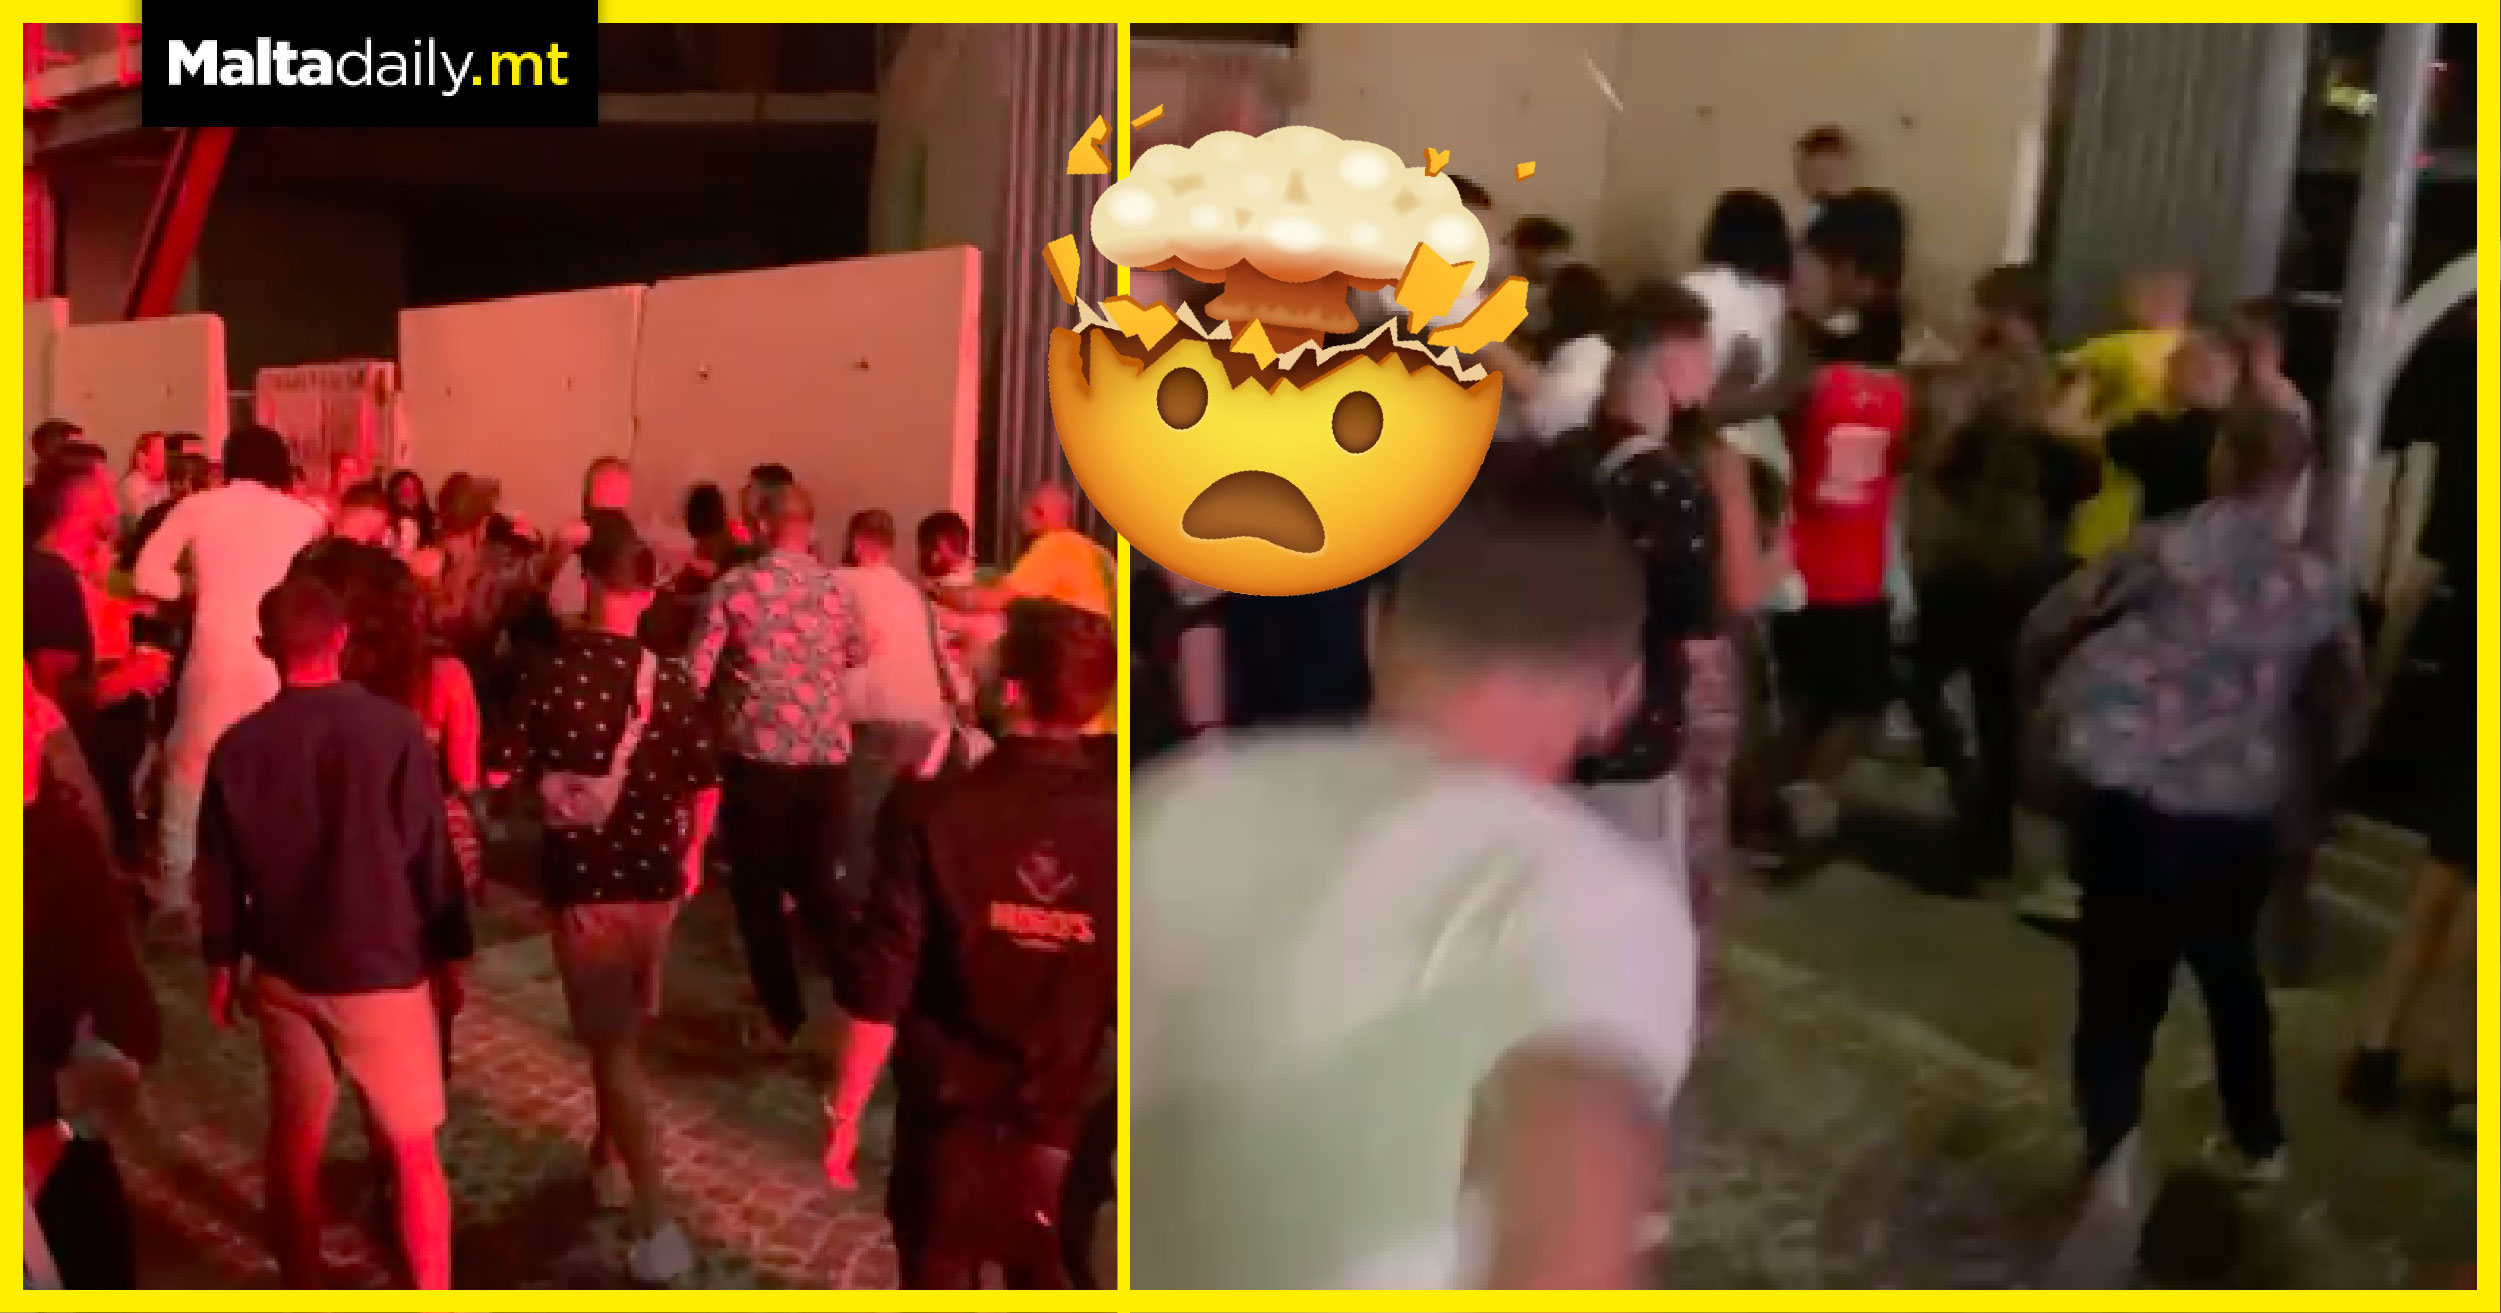 A number of videos are circulating on social media which show large groups of individuals fighting in the streets of Paceville, presumably after the closure of establishments at 12am.